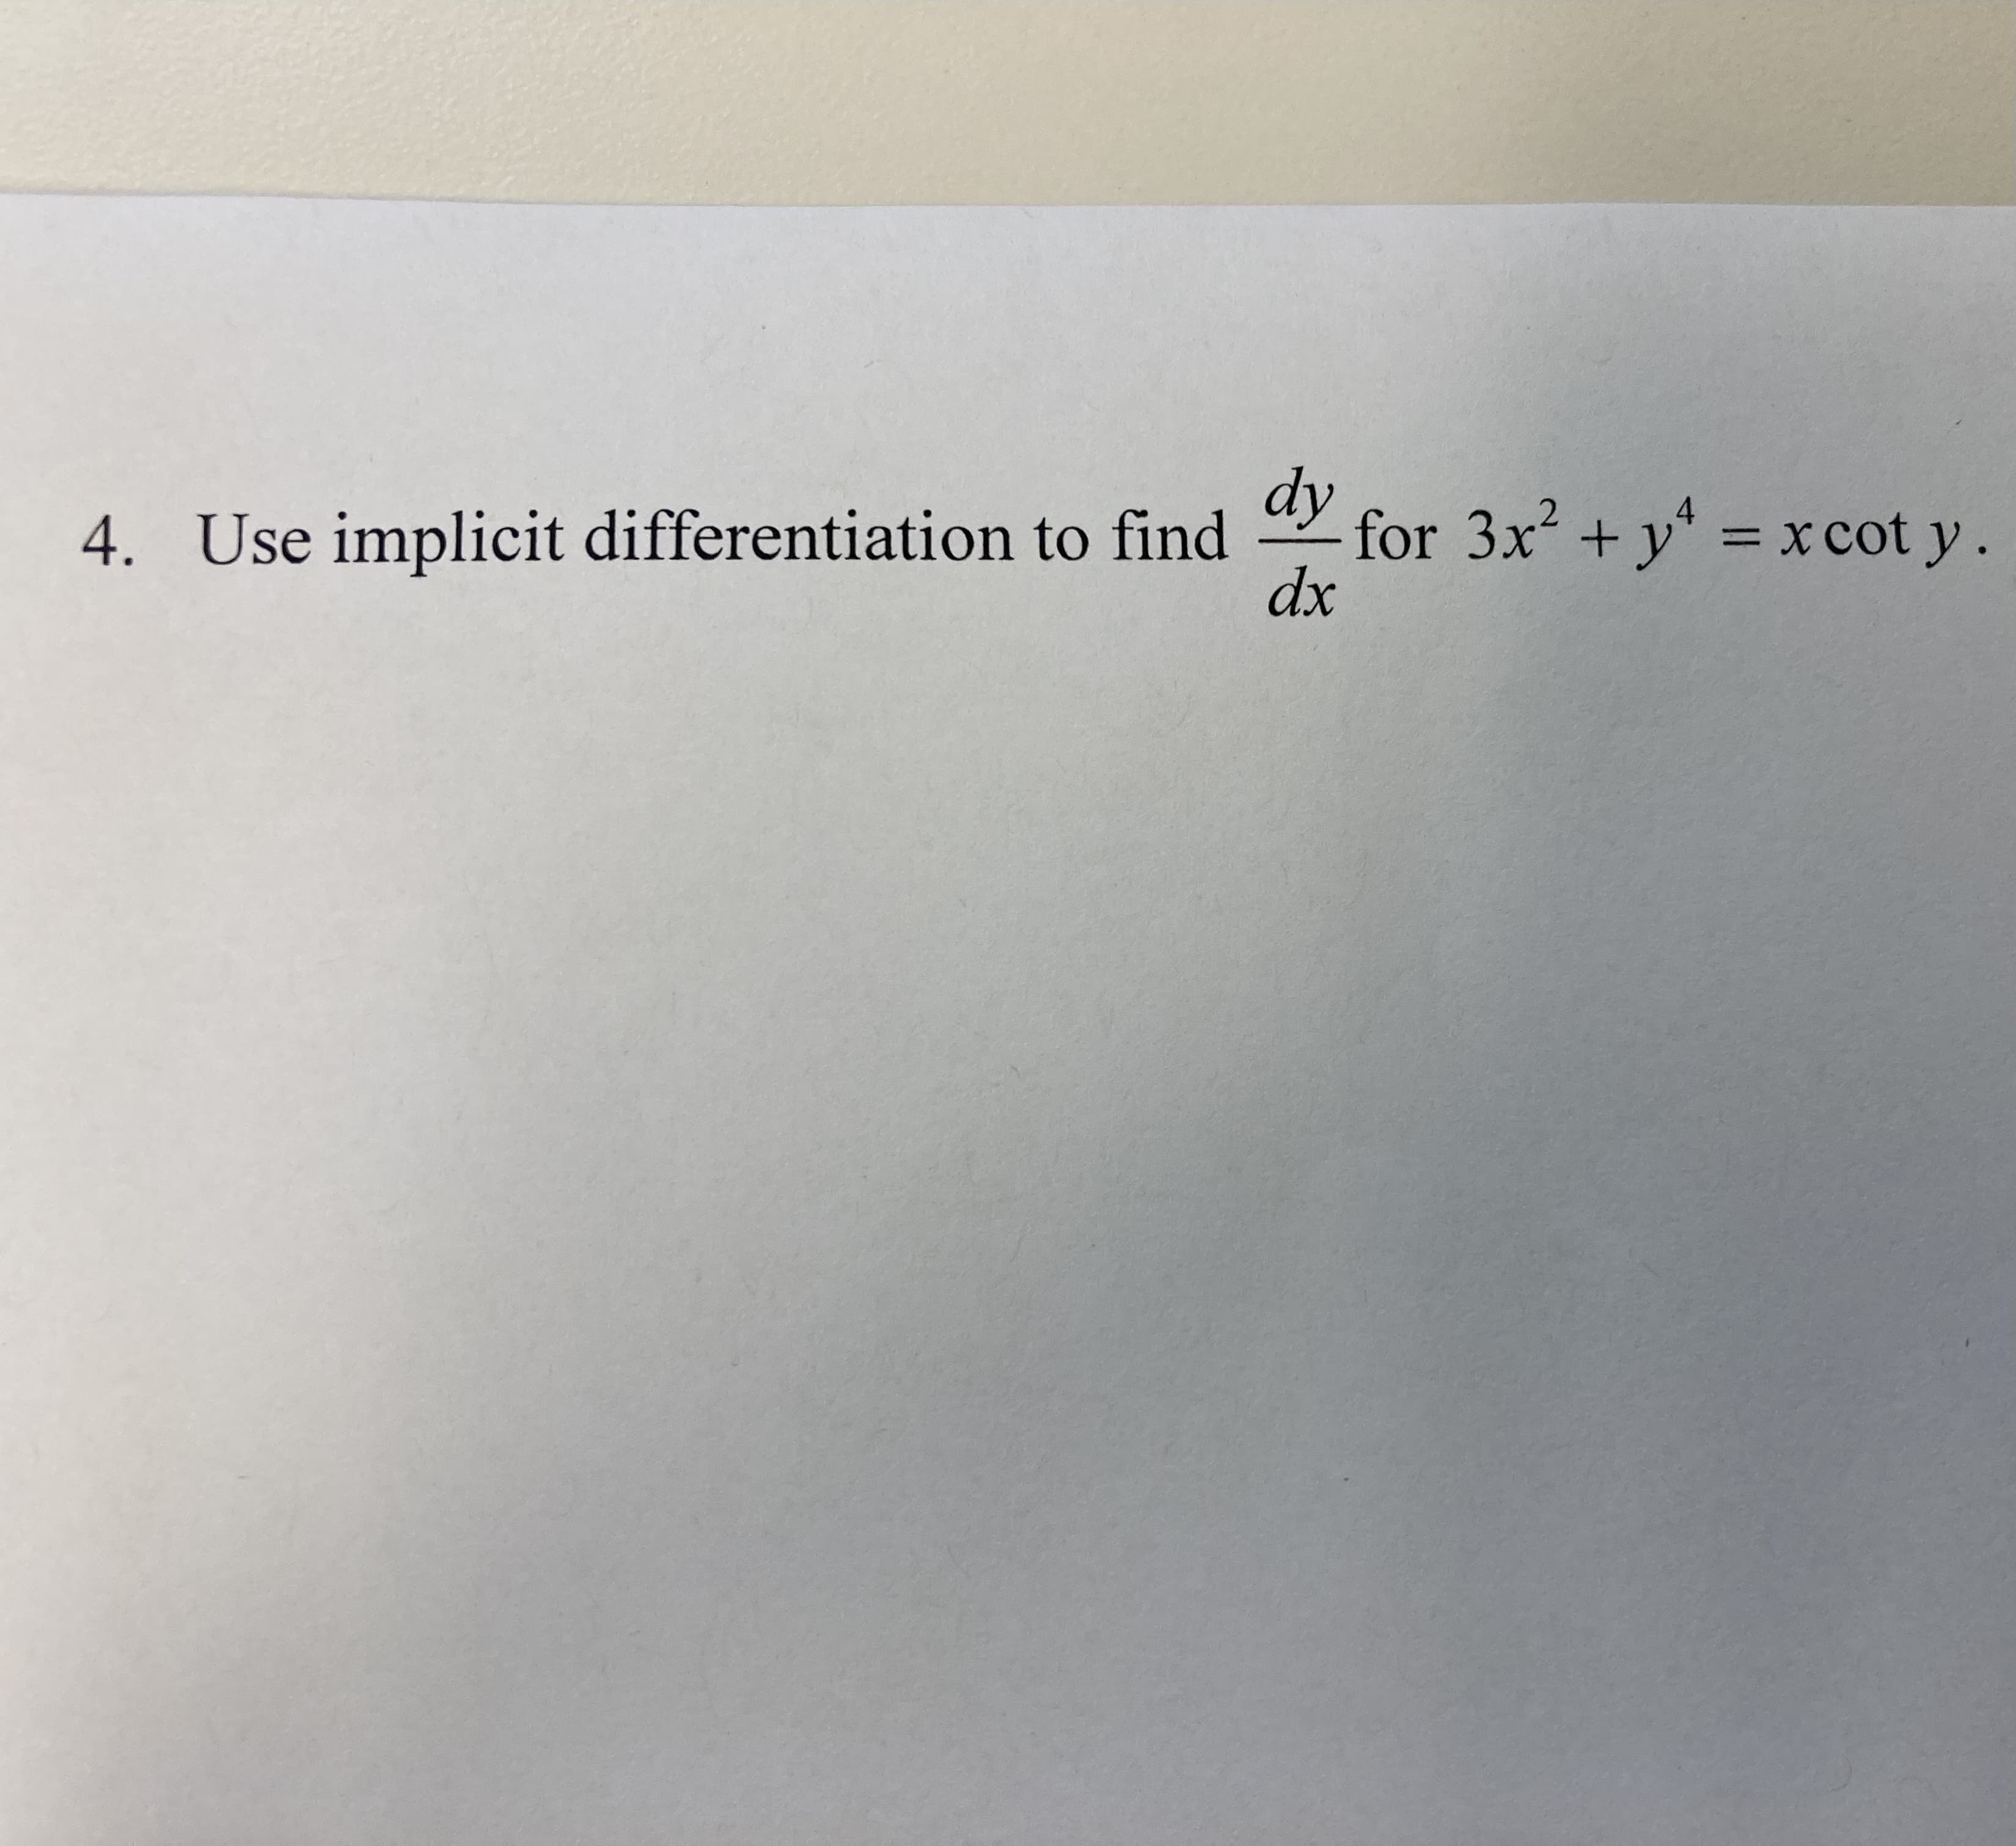 dy
for 3x + y* = x cot y.
dx
4. Use implicit differentiation to find
